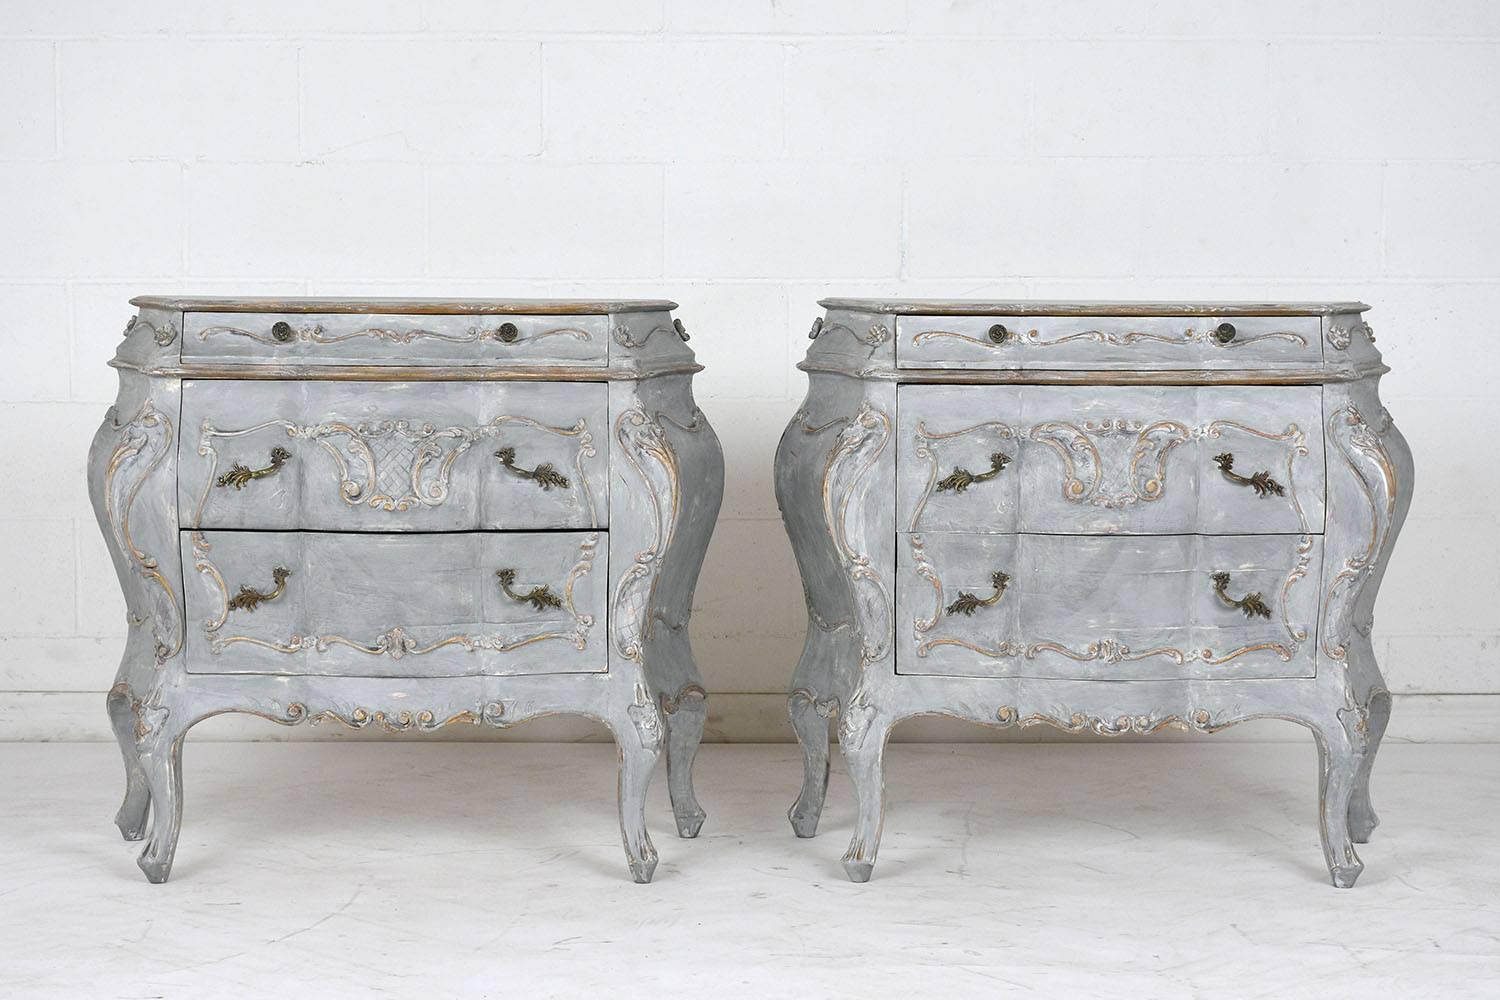 This pair of 1950's Louis XV-style Commodes are crafted out of maple wood and have newly painted in a pale gray & off-white color combination with gilt details. The commodes feature french motif carvings of scrolls, acanthus leaves, quilted